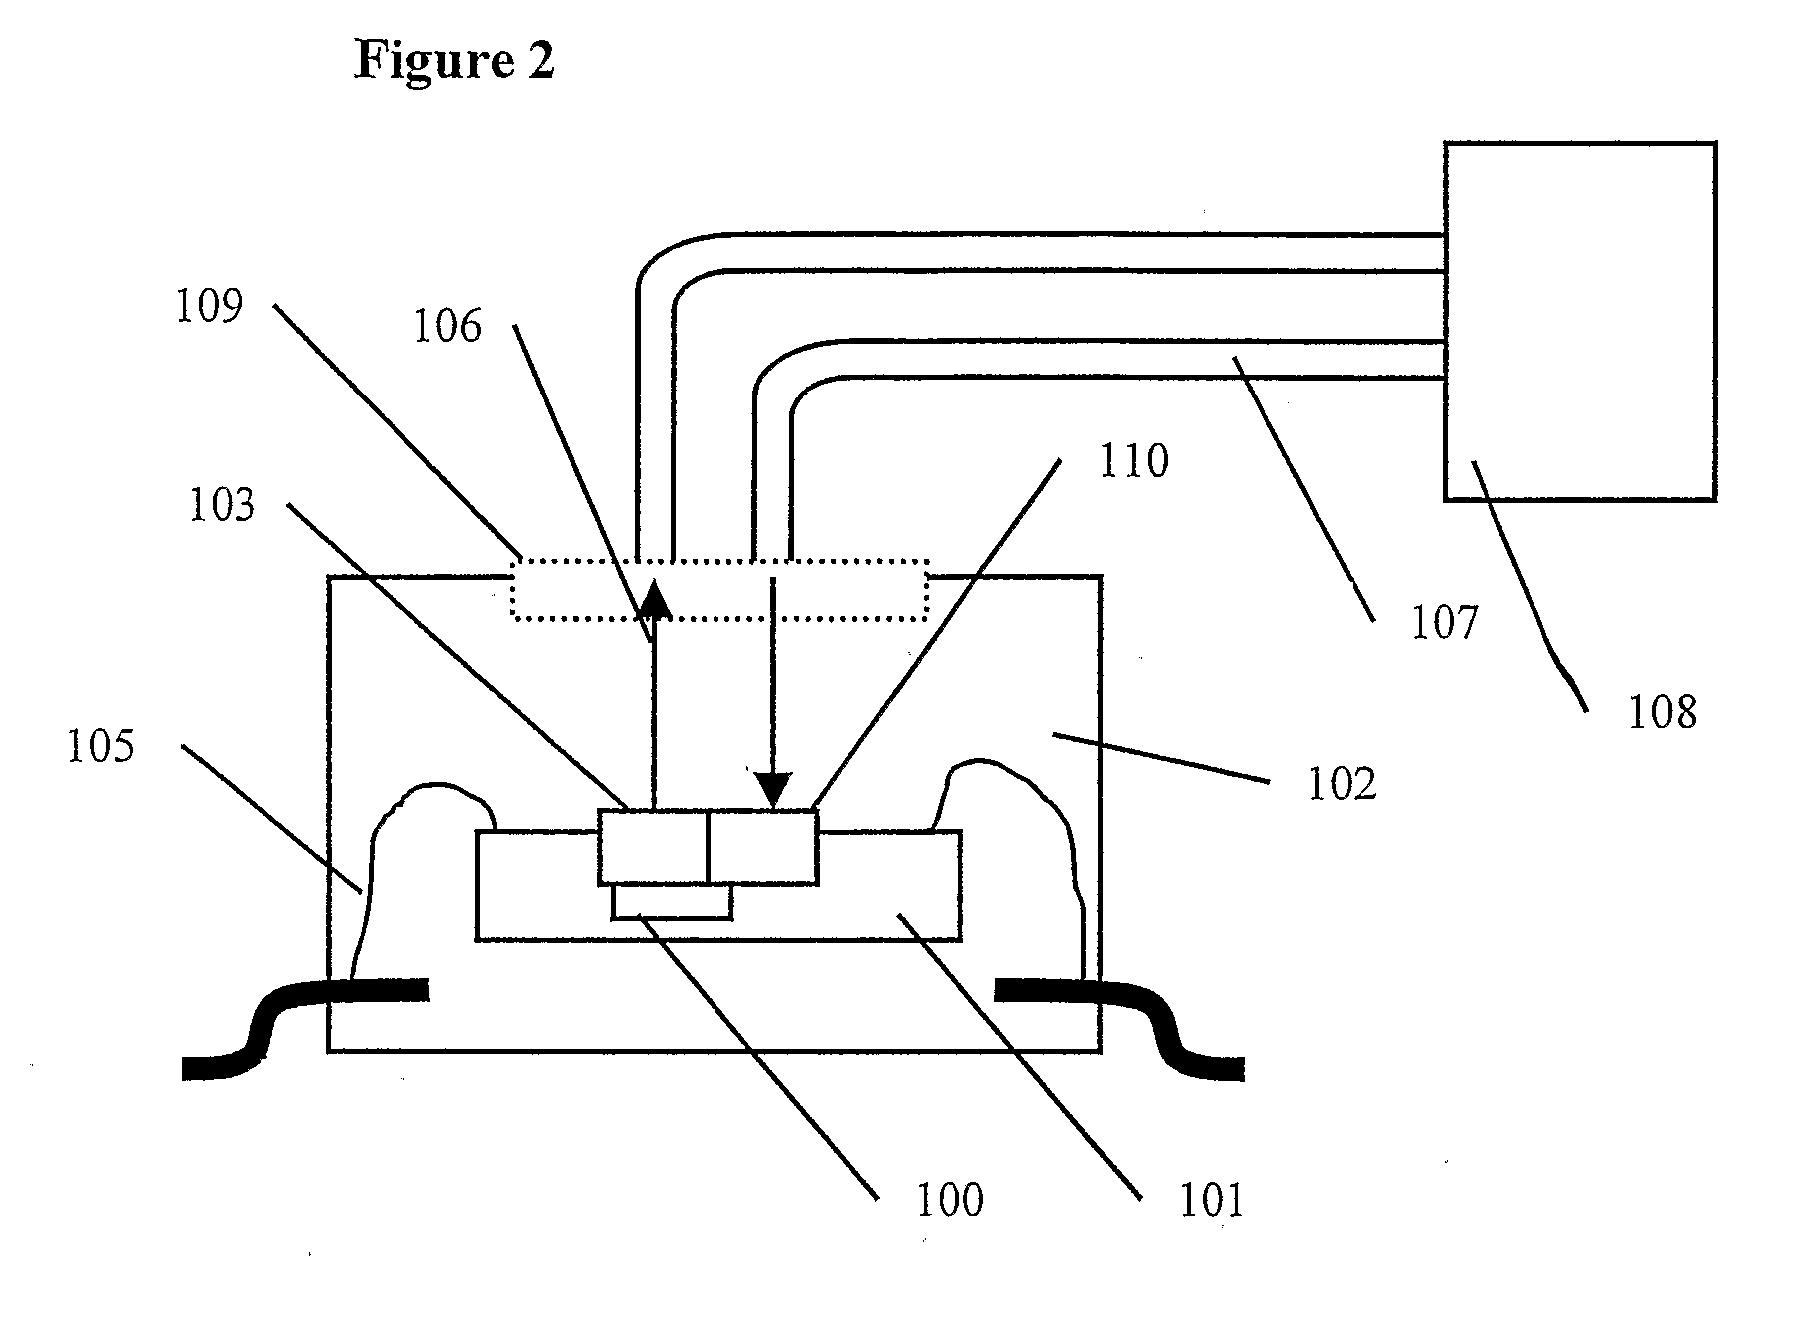 Integrated Circuit with Debug Support Interface